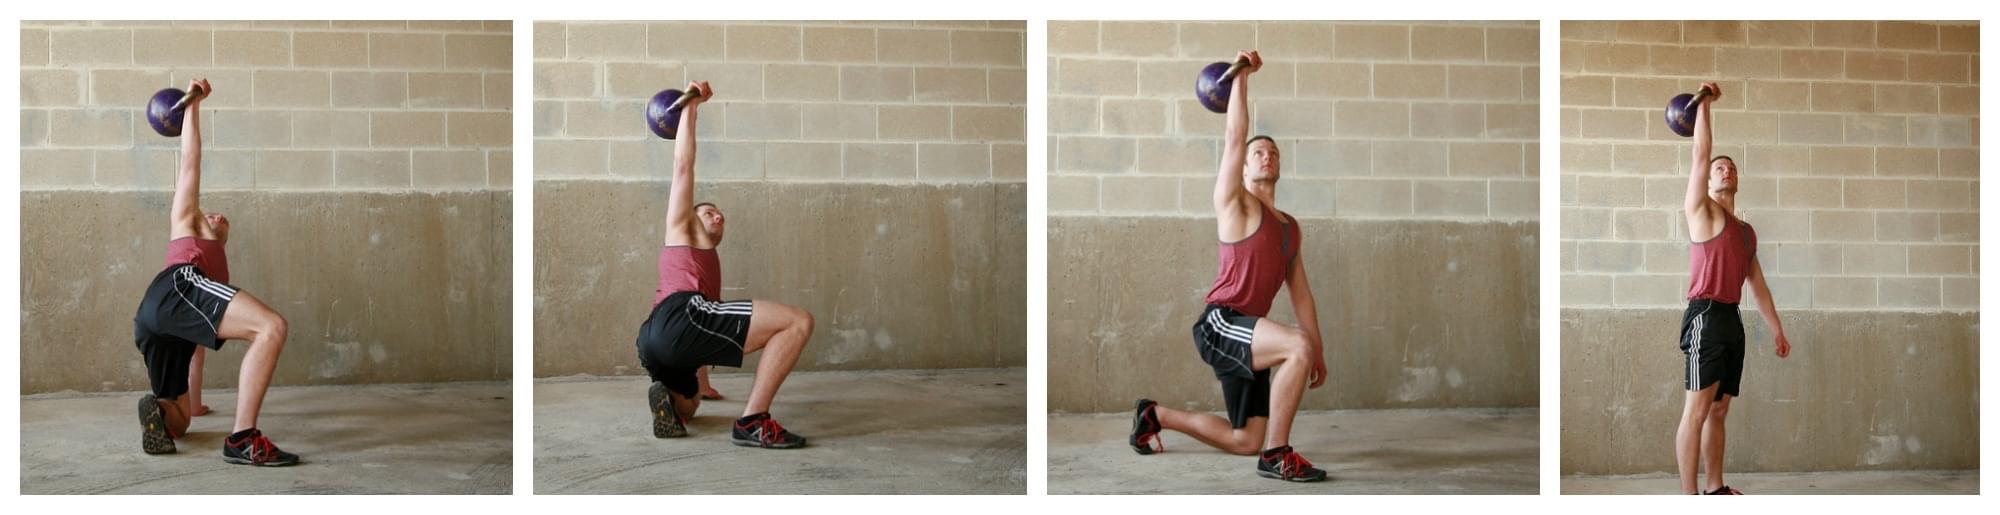 5 fun, effective turkish get up variations for strength, endurance, and mobility